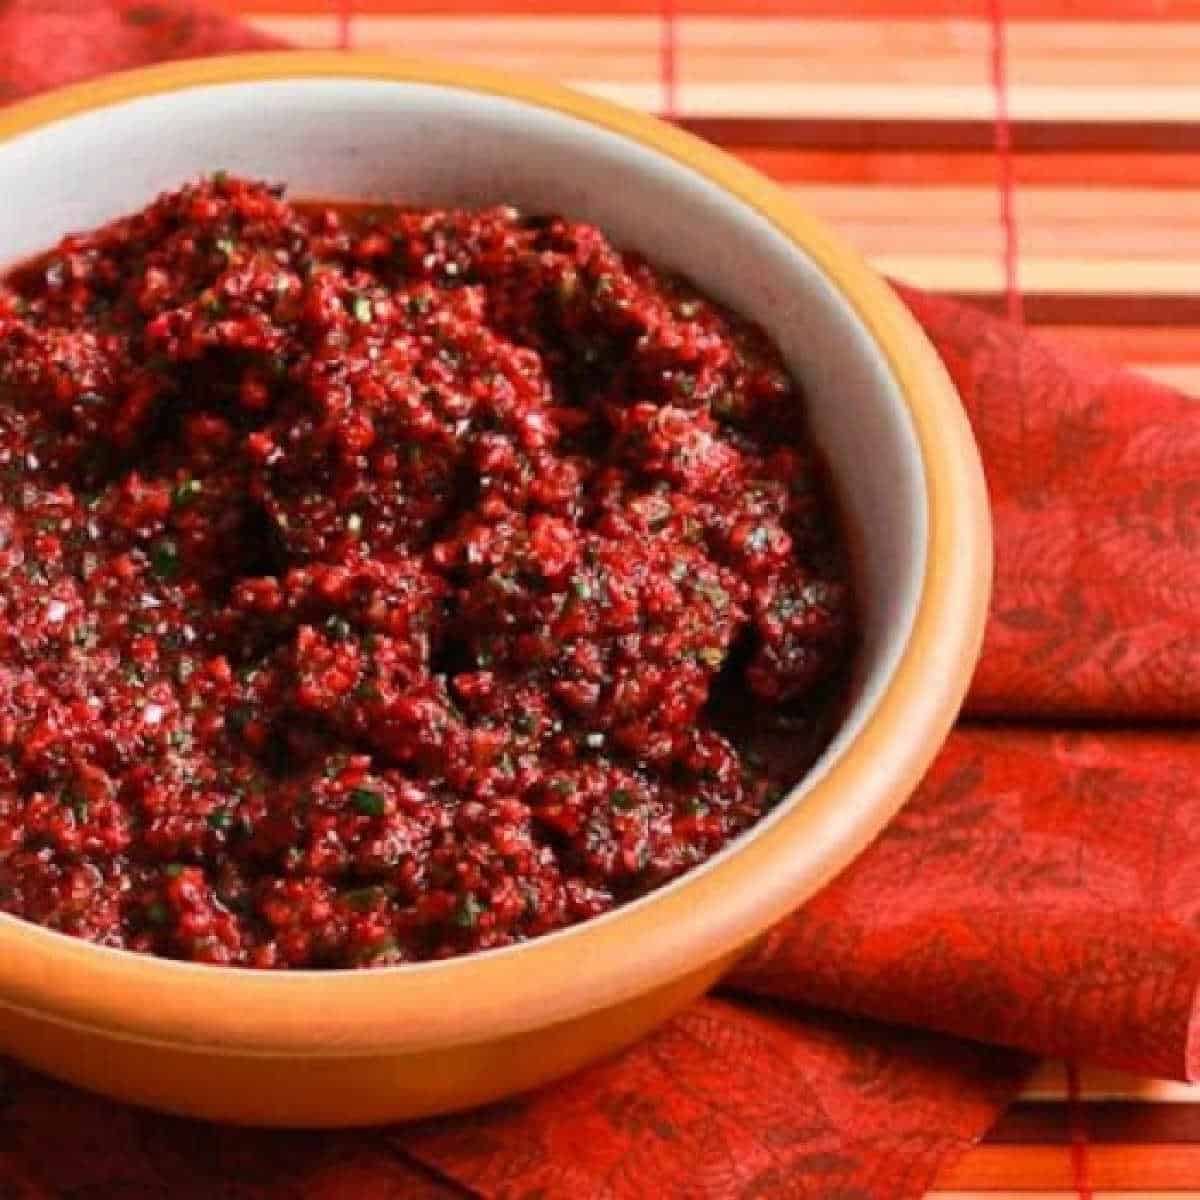 Trina's Cranberry Salsa in a bowl on a red napkin